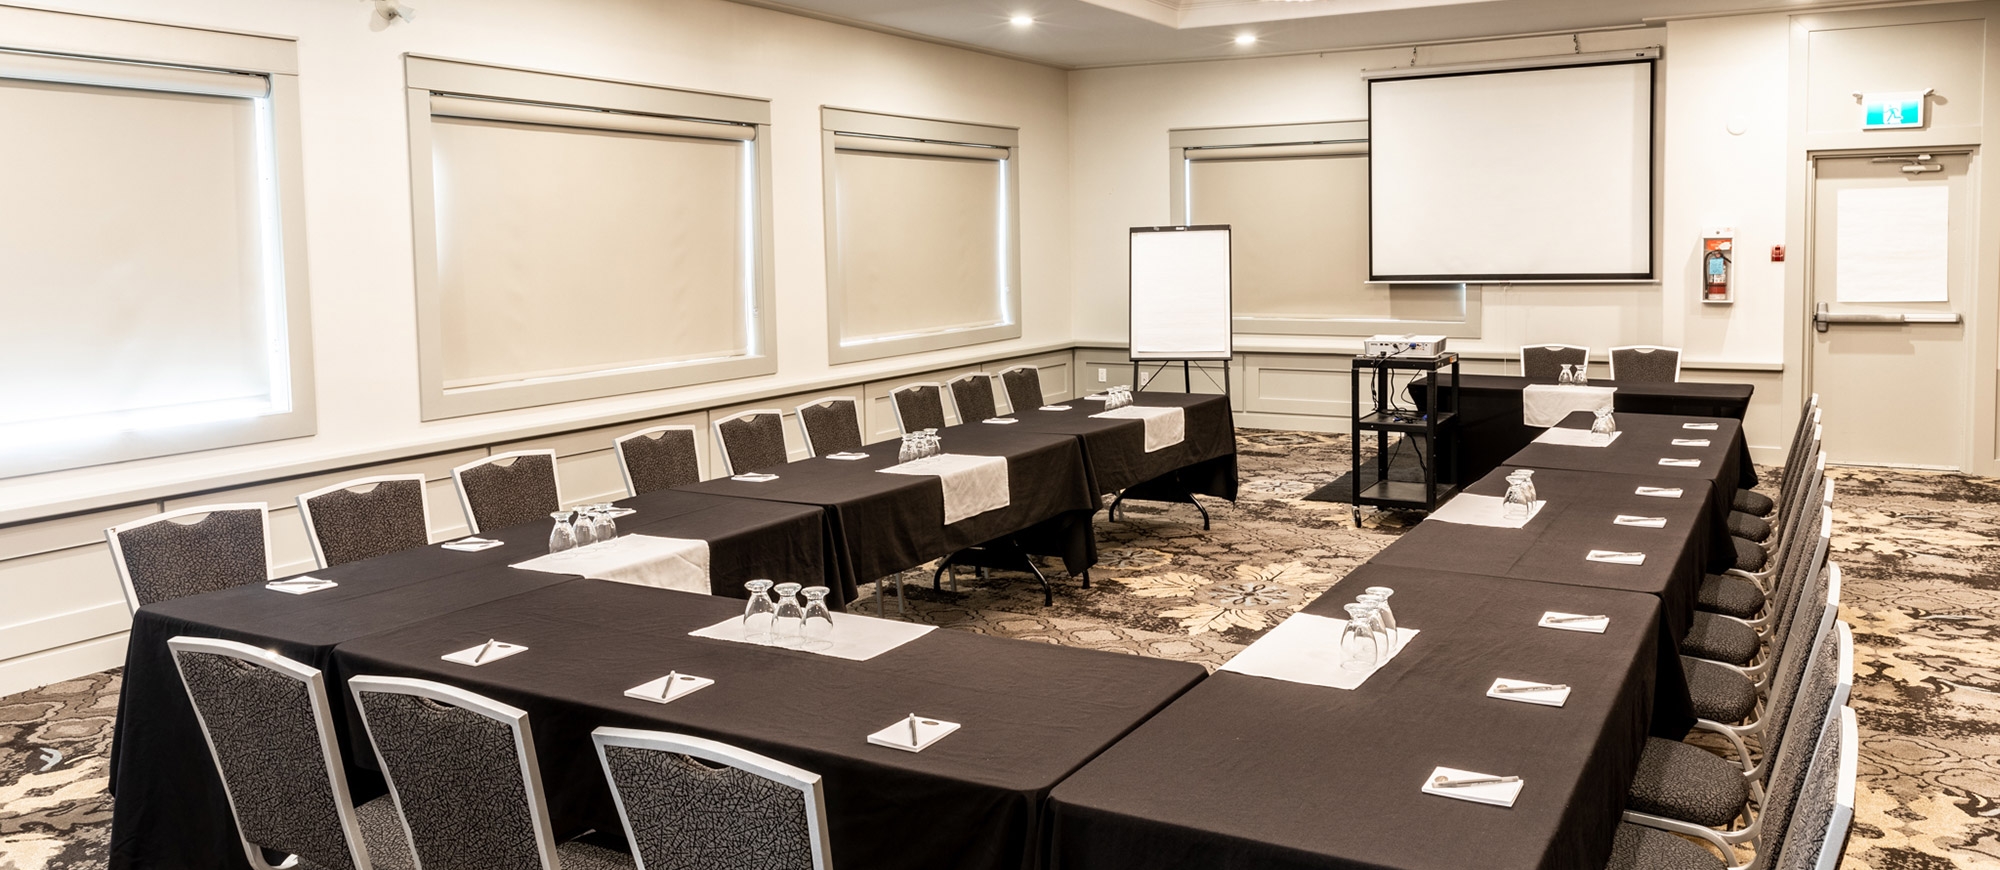 A conference room set up at the Prestige Lakeside Resort in Nelson, BC